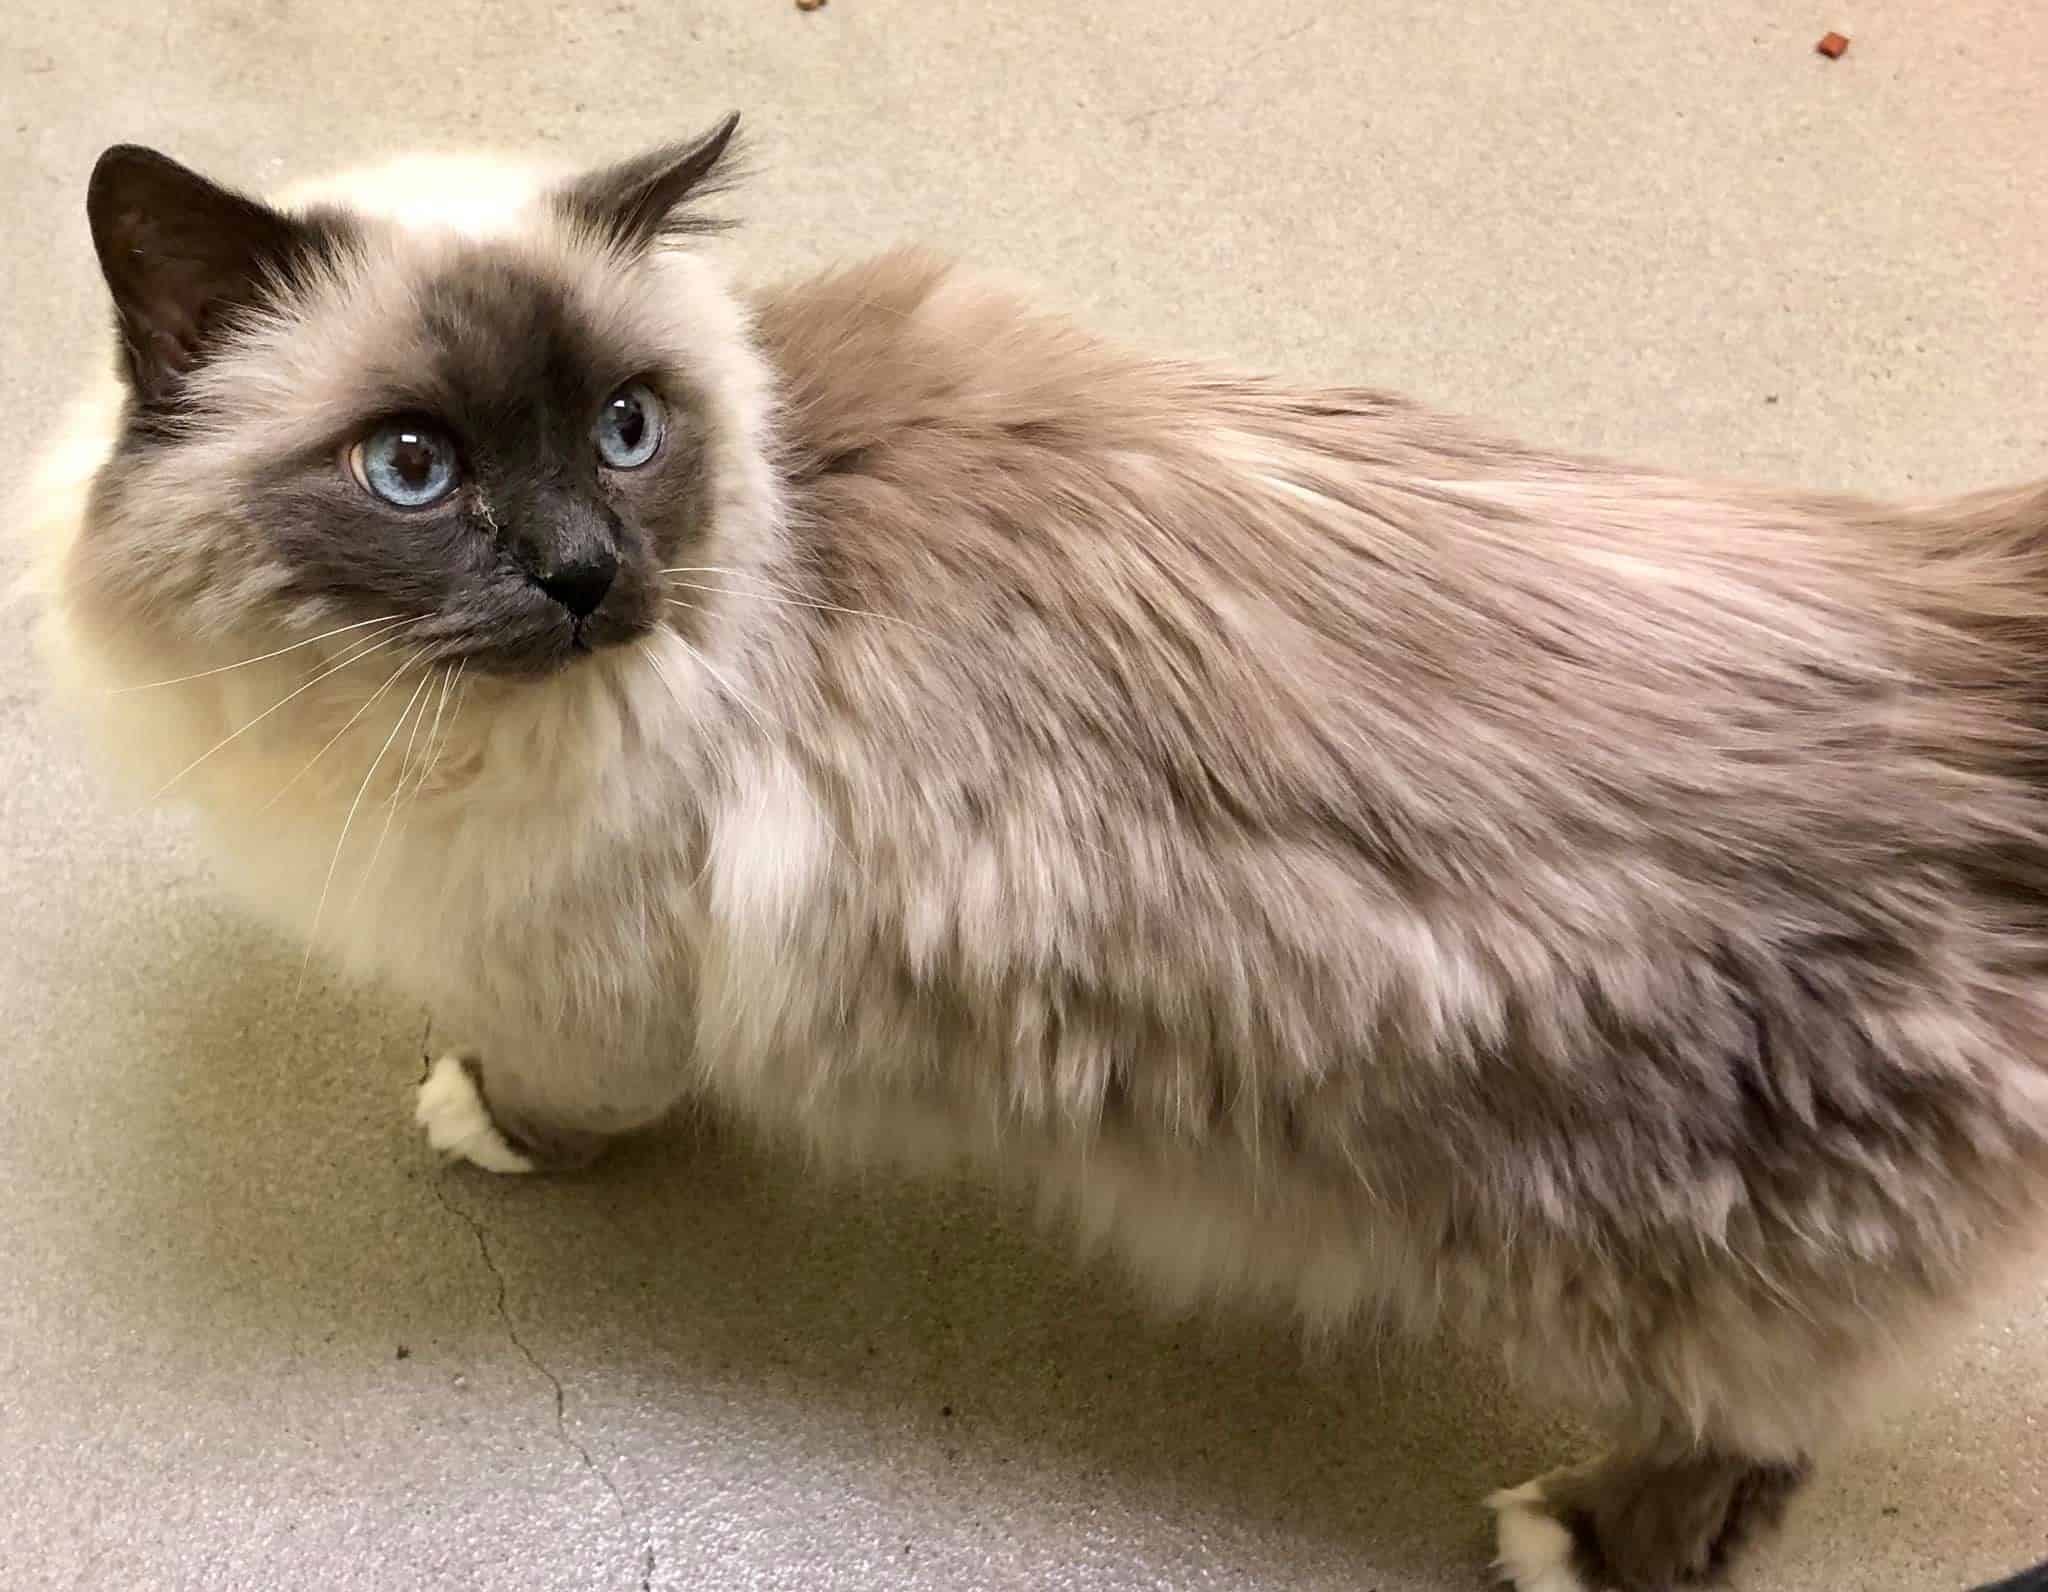 With Update Two 16 Year Old Birman Cats Relinquished To Shelter With Heartbreaking Note By Sobbing Owner Entering Nursing Home Cole Marmalade